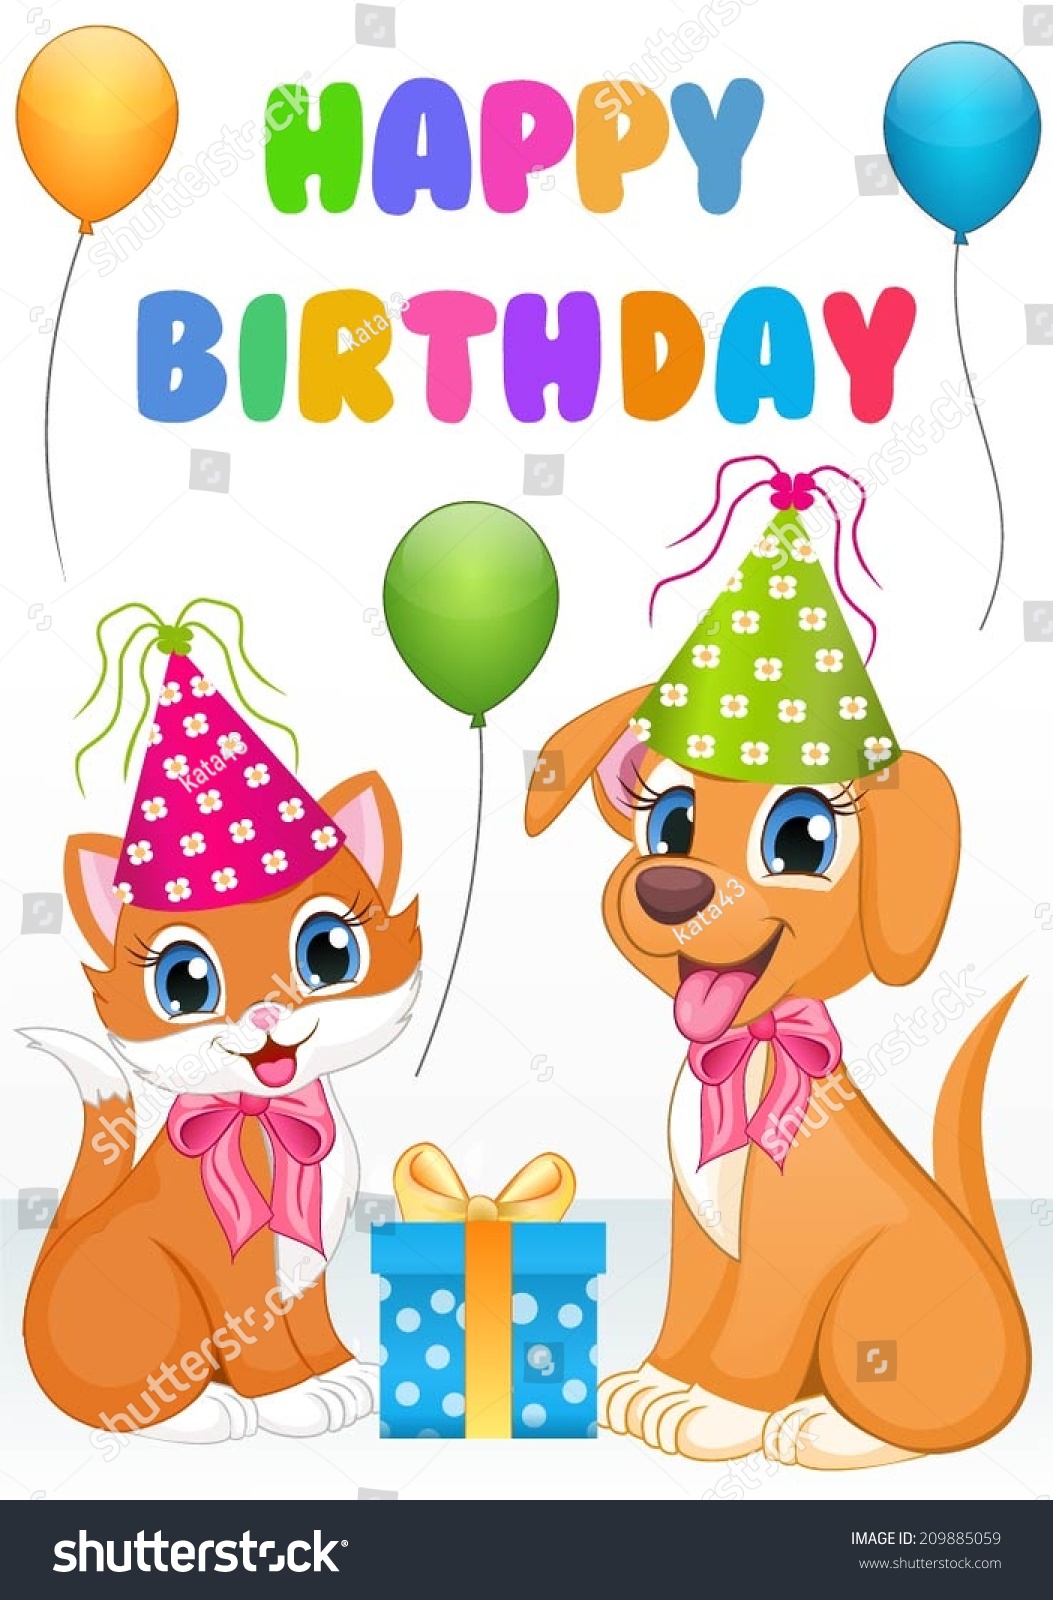 Cute Dog And Cat Birthday Card Stock Vector 209885059 : Shutterstock